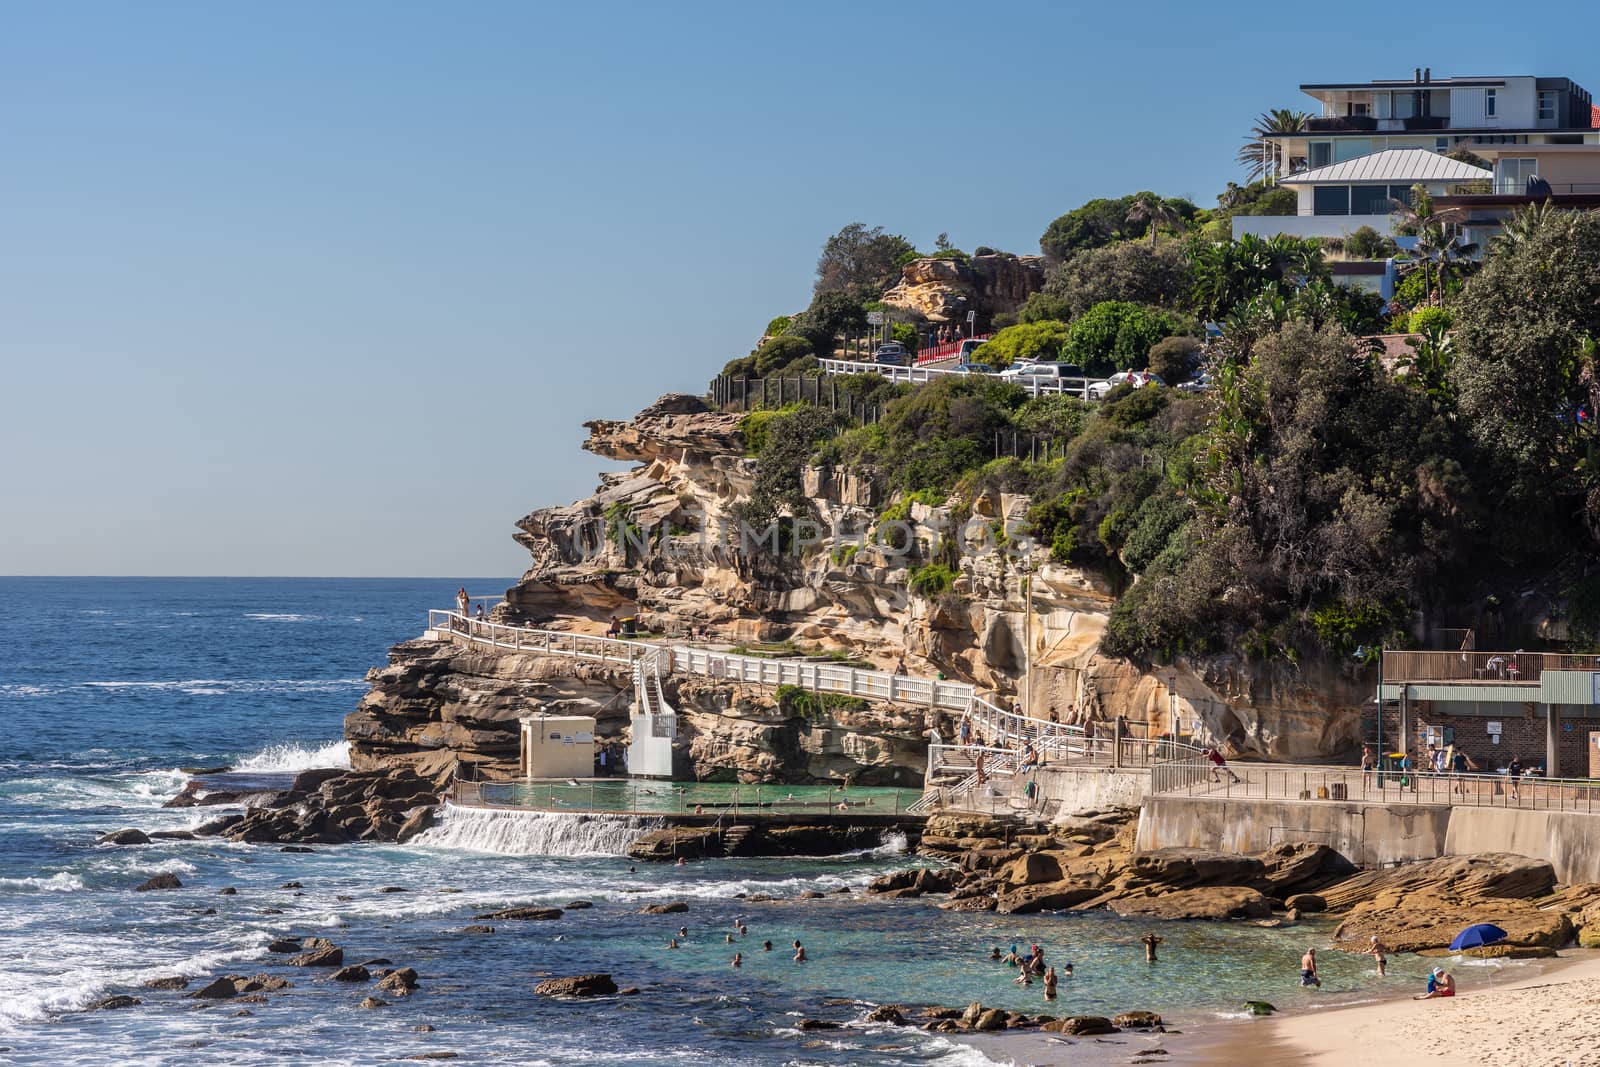 Sydney, Australia - February 11, 2019: Focus on the South Cliff at Bronte Beach with swimming pool in front. Peple in water and on sand. Housing in green vegetation on top of rocks.